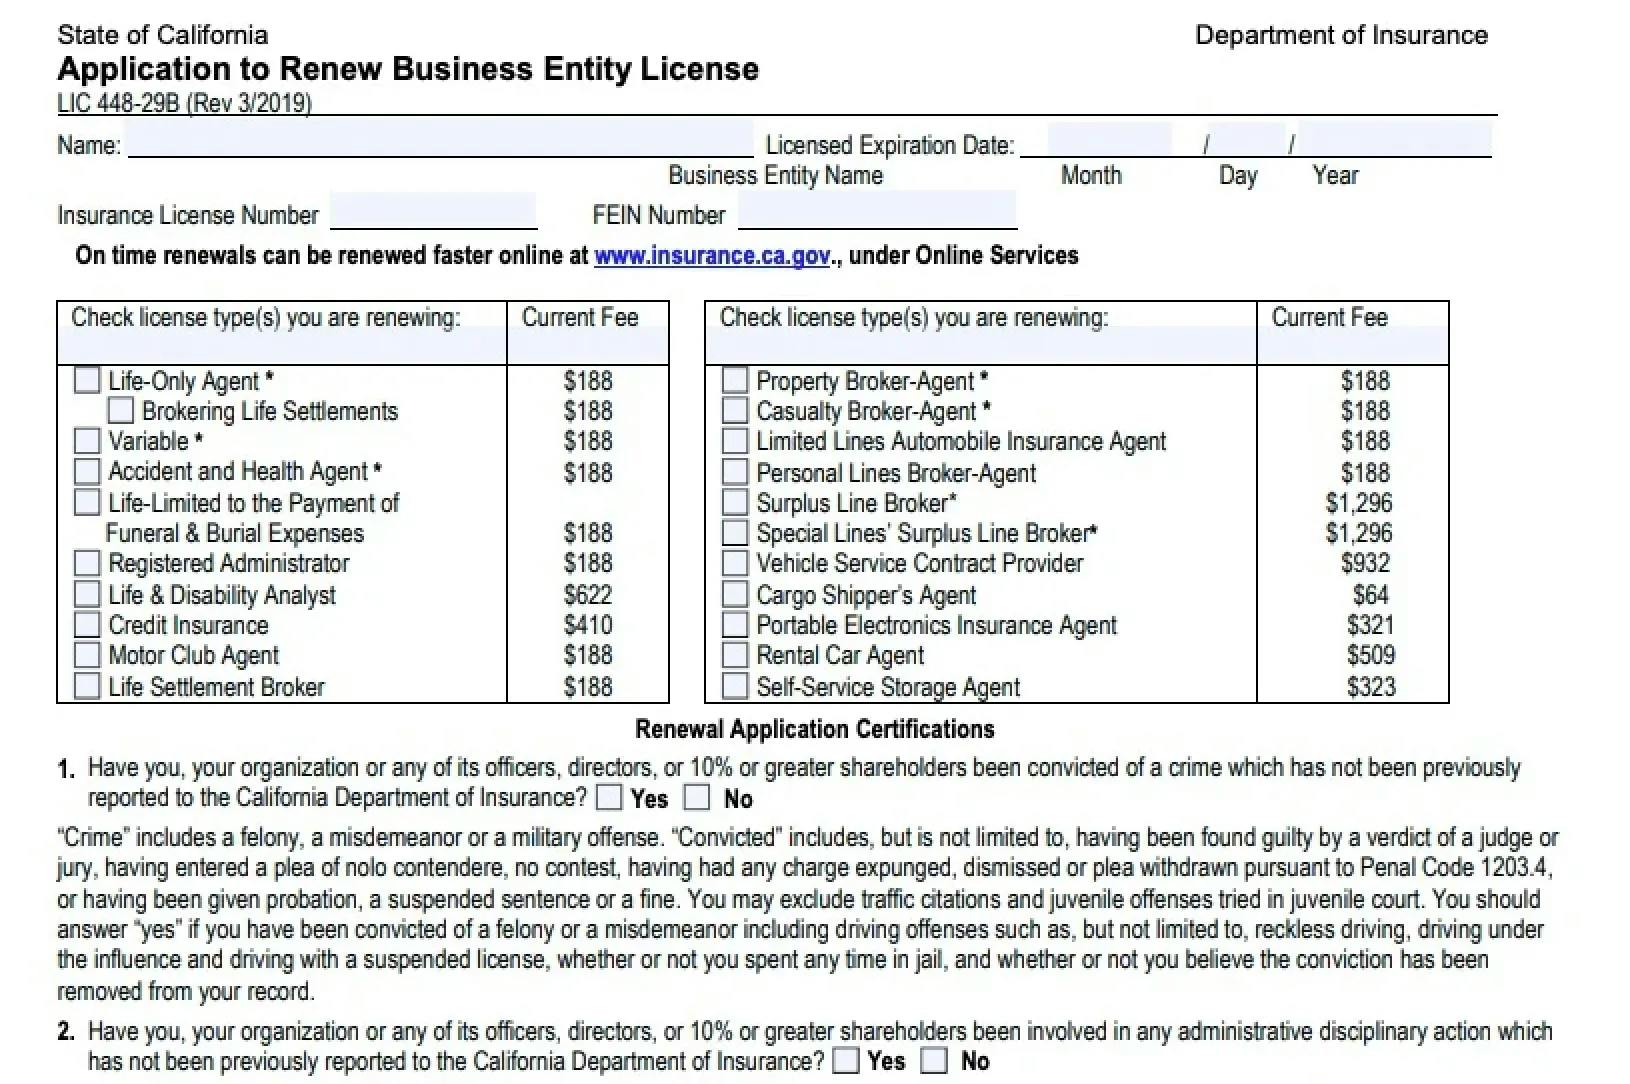 Application to renew business entity license